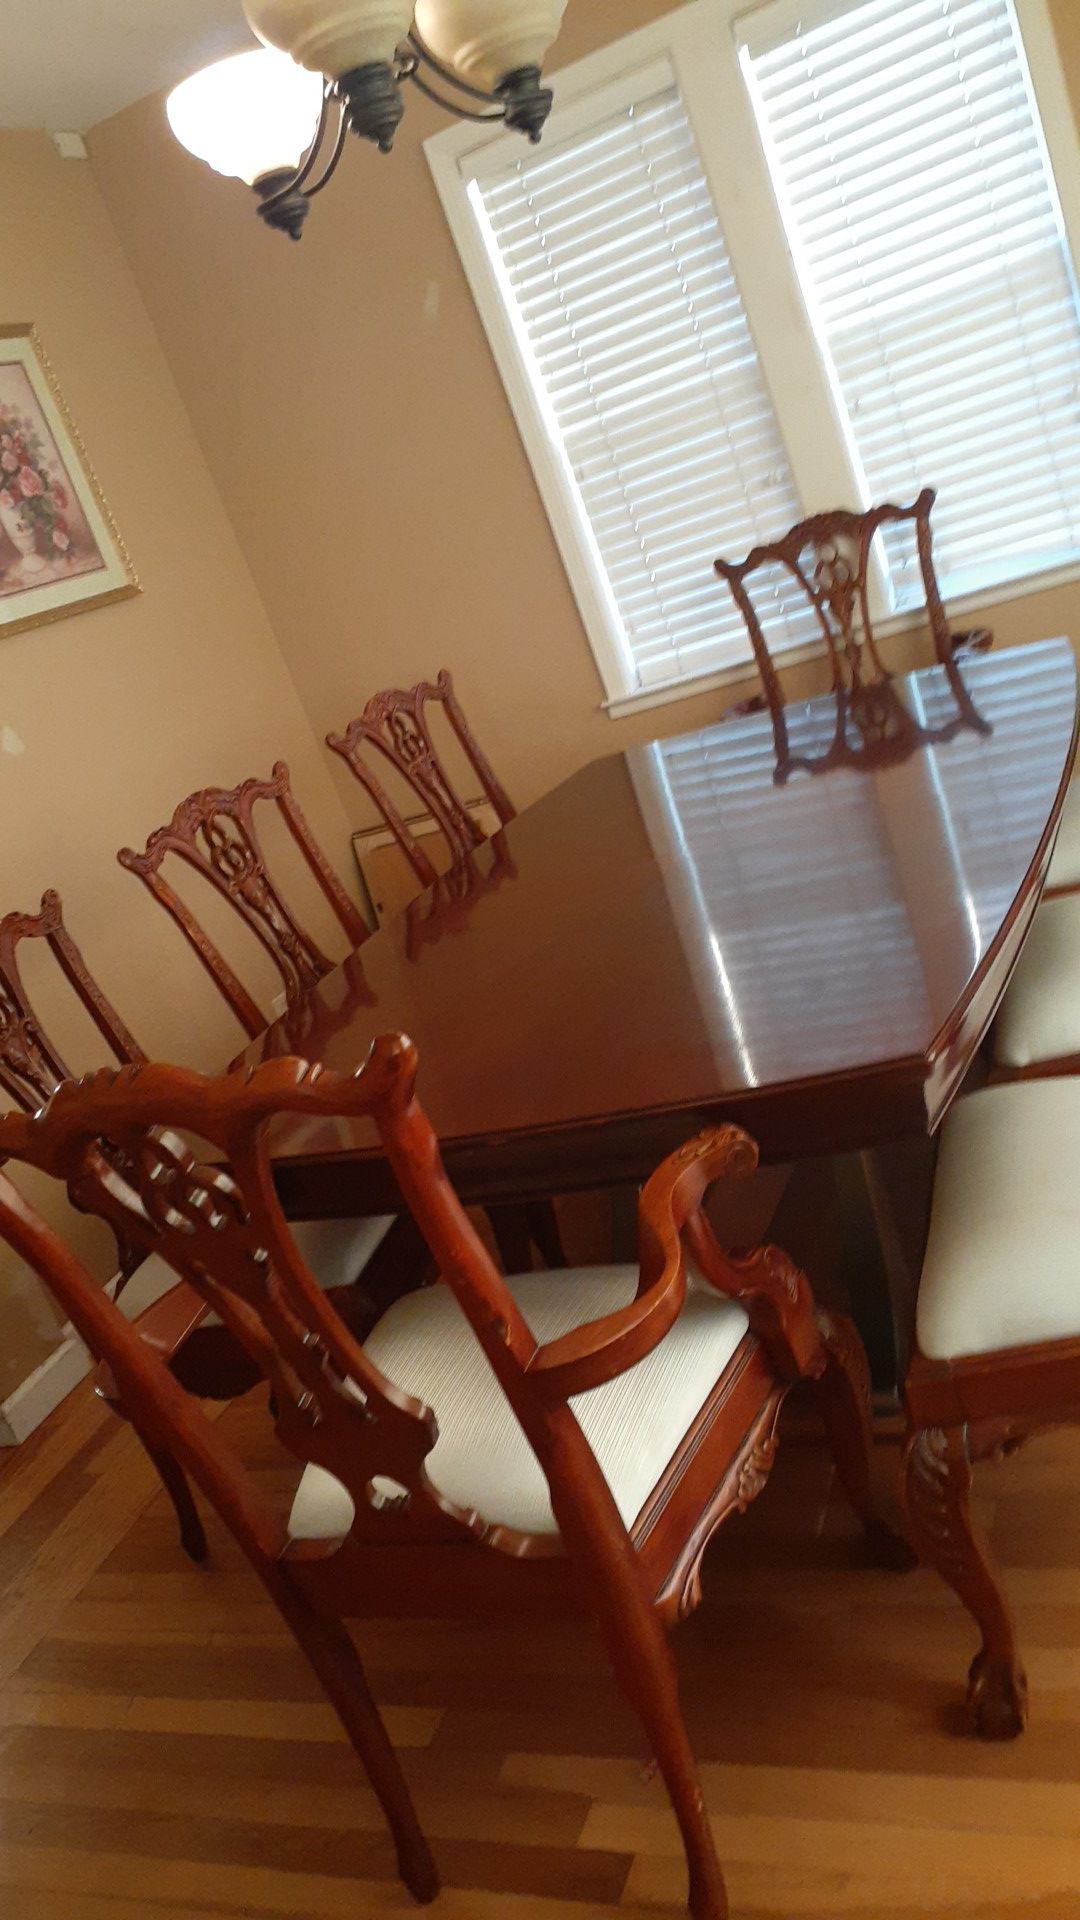 8 chair dining table